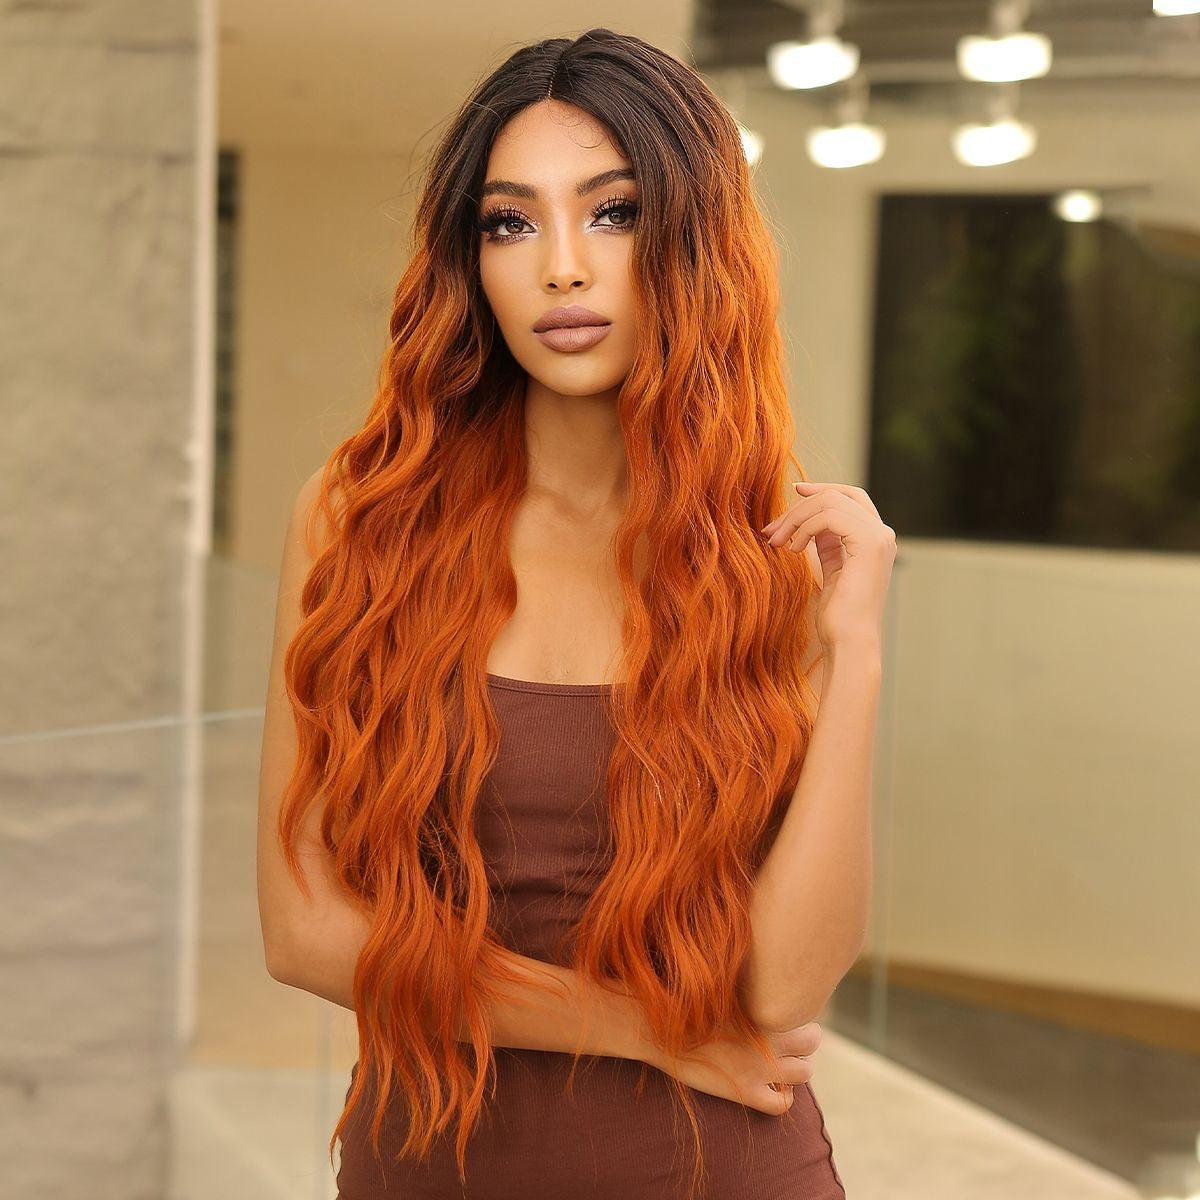 【Sphere 26】30-inch  black ombre orange lace front wigs Long curly Wavy Wig  HC11059-2